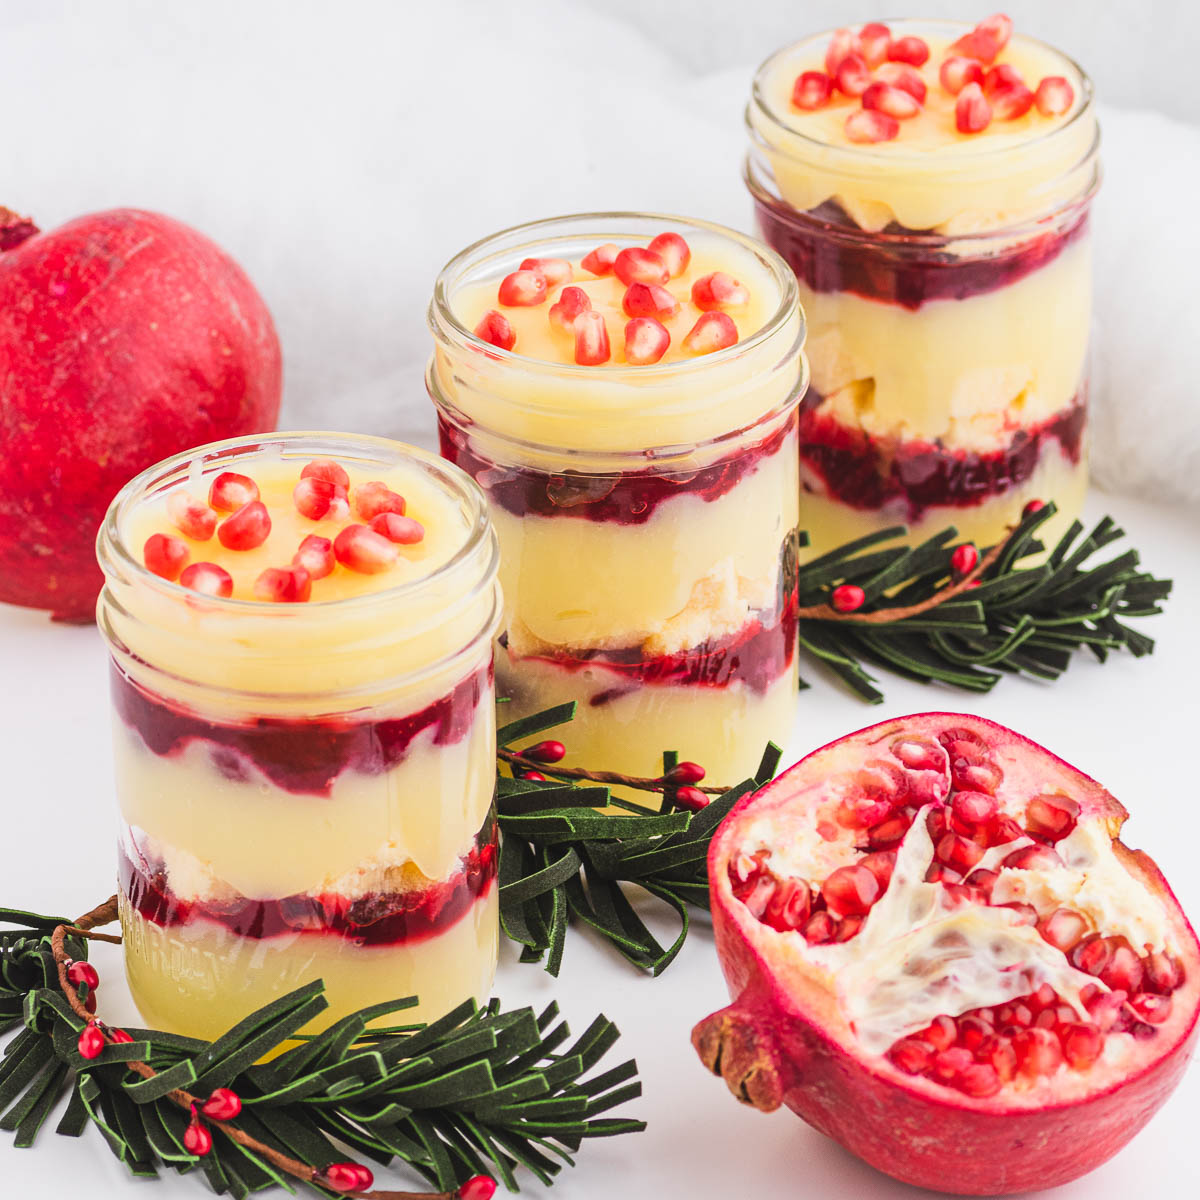 Three glass half pint jars filled with a layered Christmas trifle garnished with pomegranate seeds.